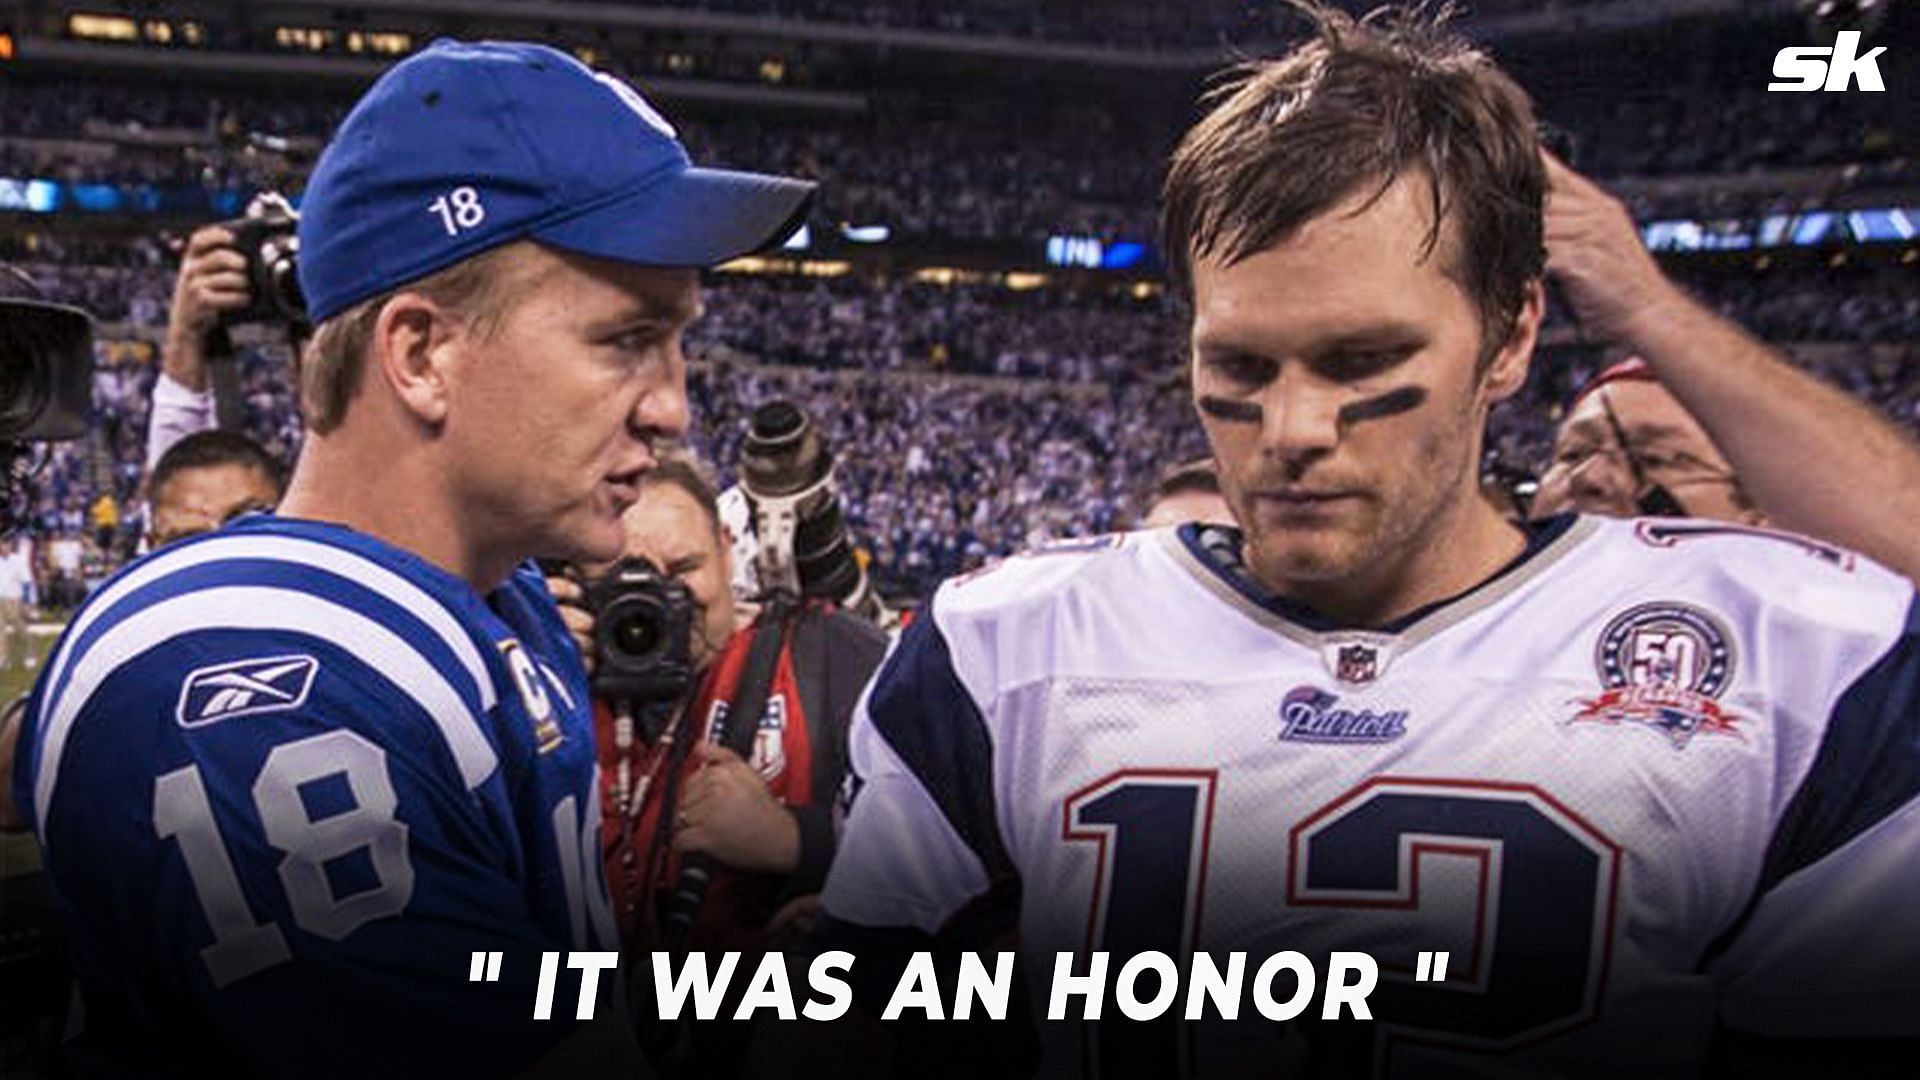 Peyton Manning brushes rivalry aside to congratulate Tom Brady upon retiring